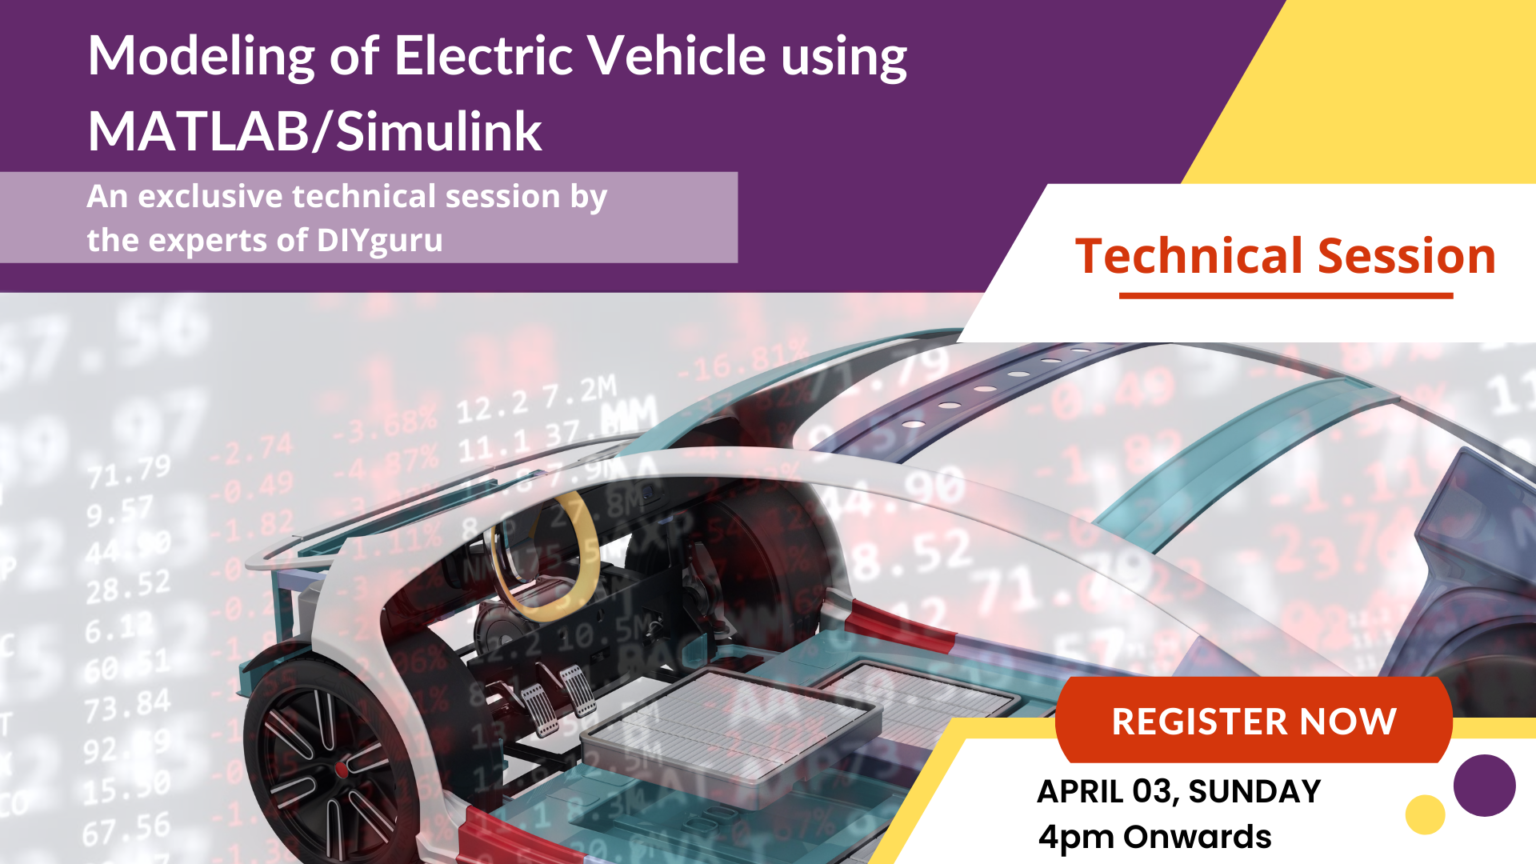 Modeling of Electric Vehicle using MATLAB/Simulink03 April 2022 4 PM